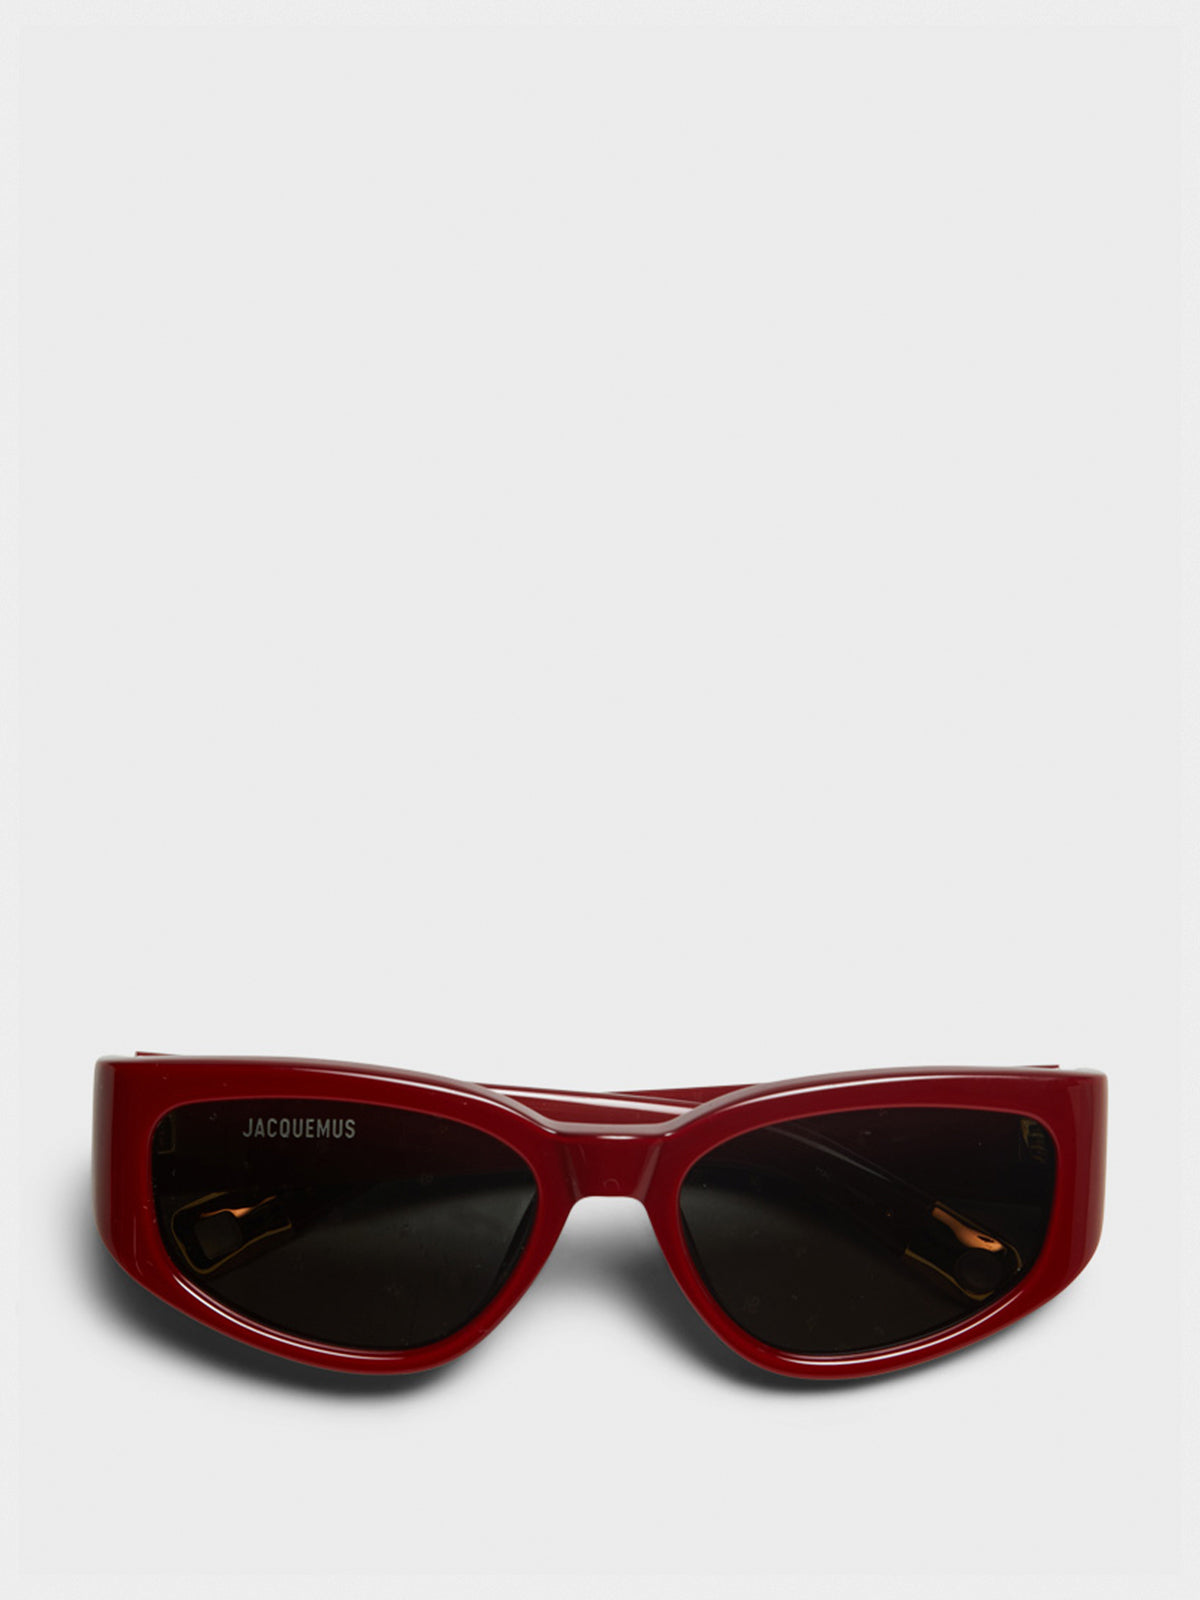 Gala Sunglasses in Burgundy, Yellow Gold and Grey